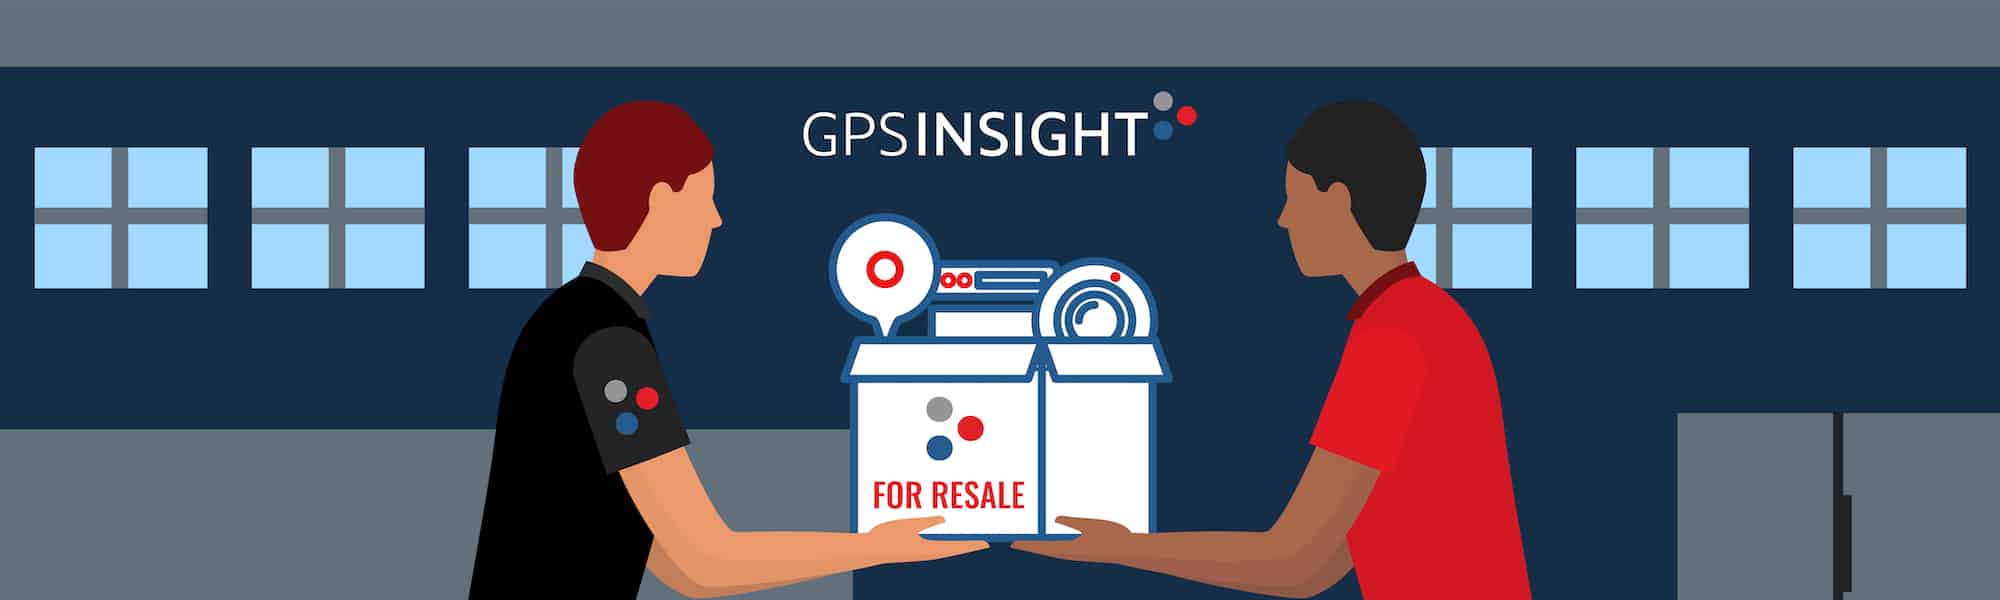 Working with GPS Insight to Support Your Clients Drive Revenue